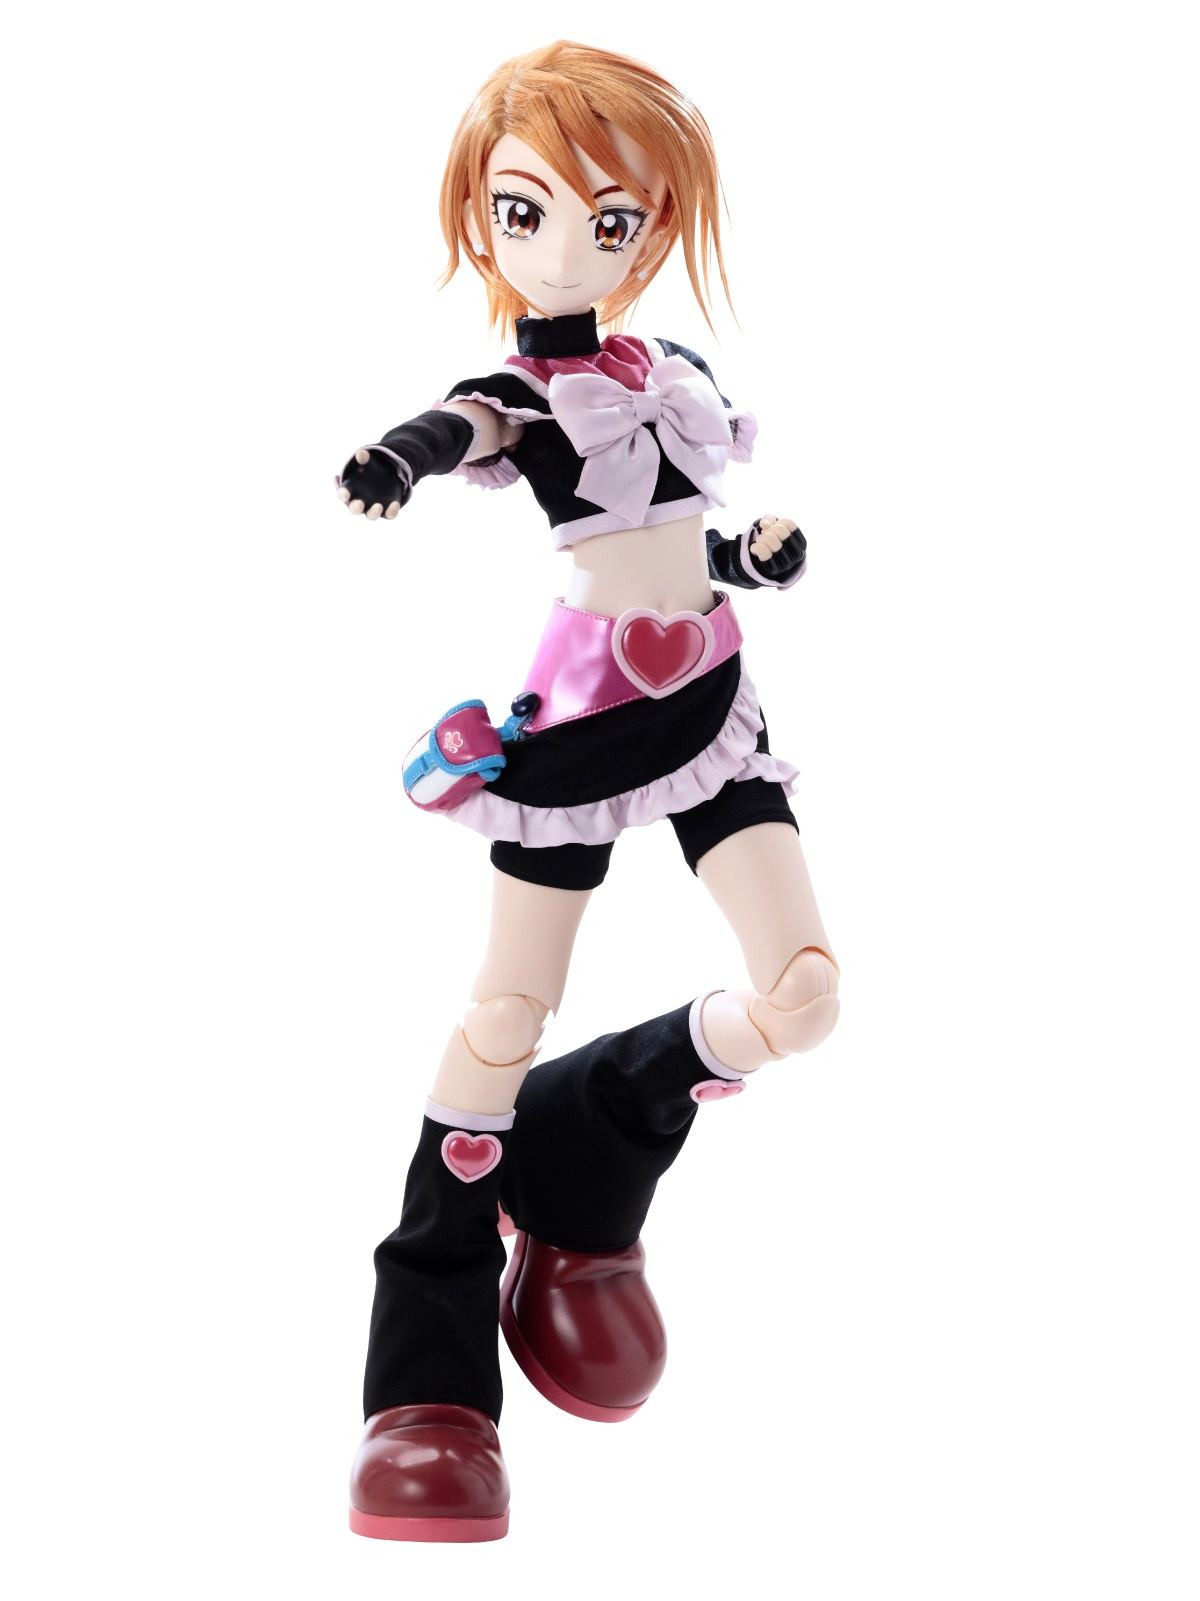 NEW Bandai Pretty Cure All Stars 01 cure Doll Cure Black Action Figure F/S